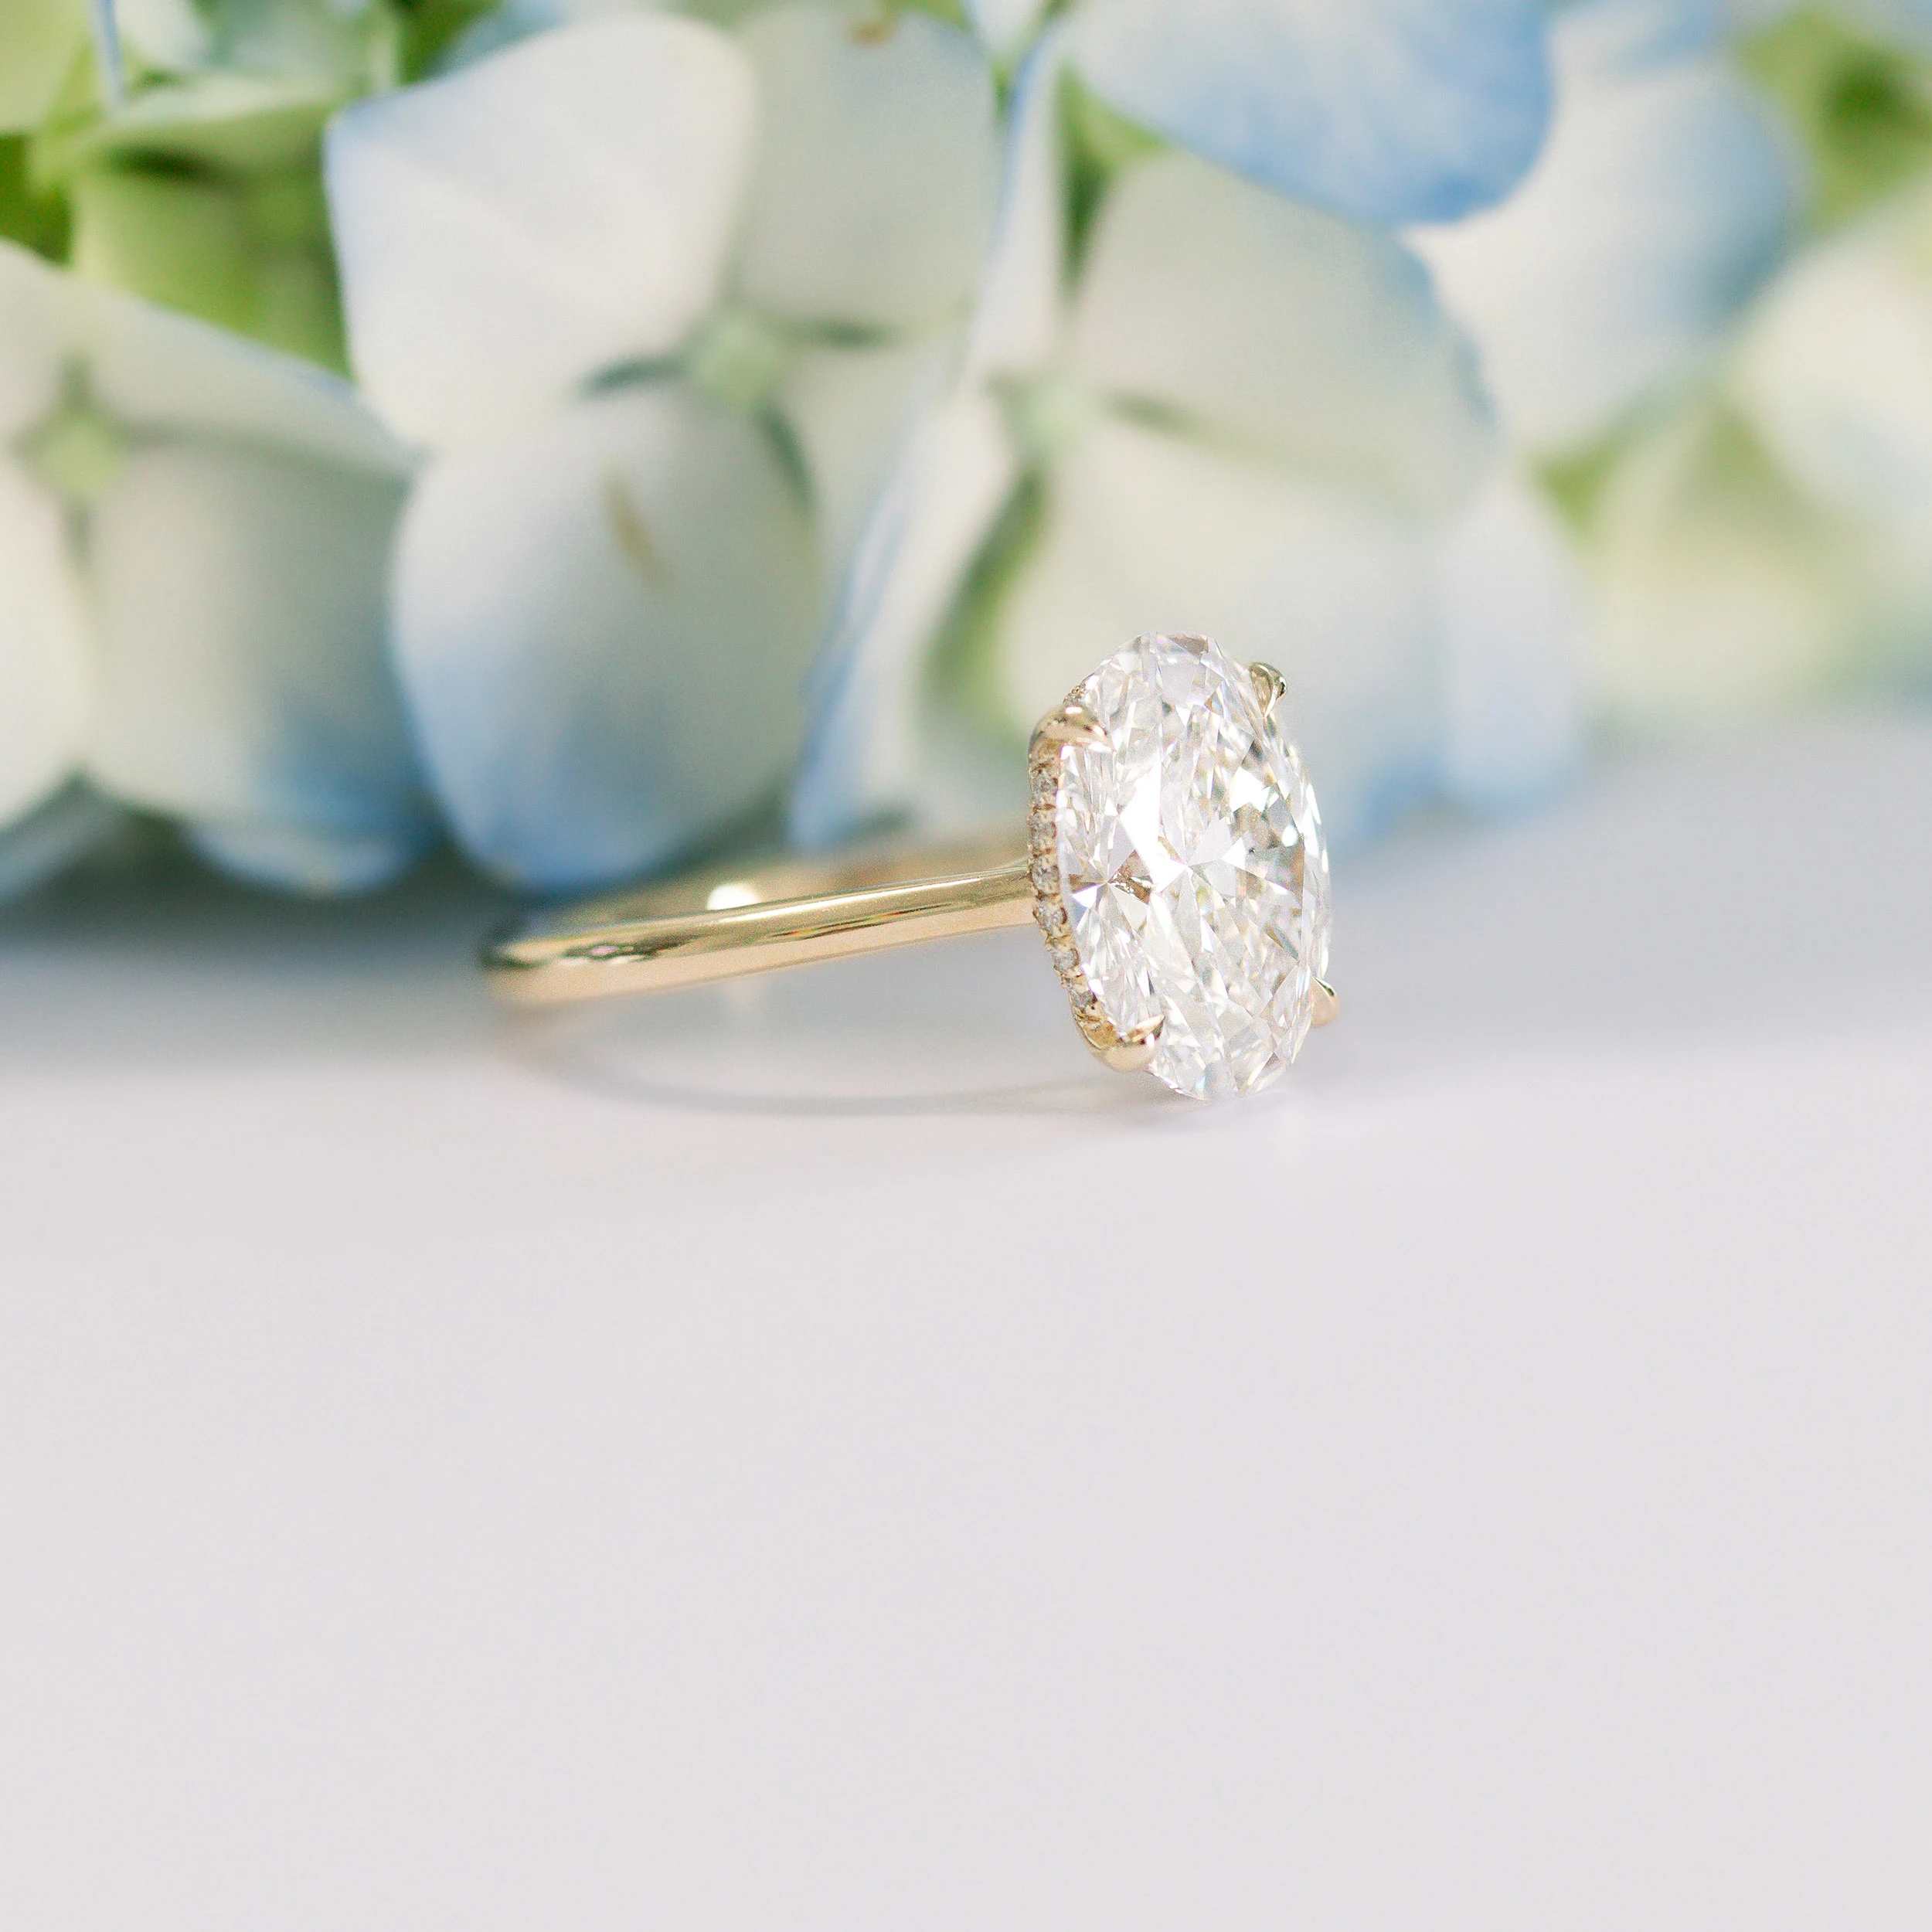 Yellow Gold Oval Trellis Solitaire Diamond Engagement Ring featuring Exceptional Quality 3.75 ctw Lab Diamonds (Main View)